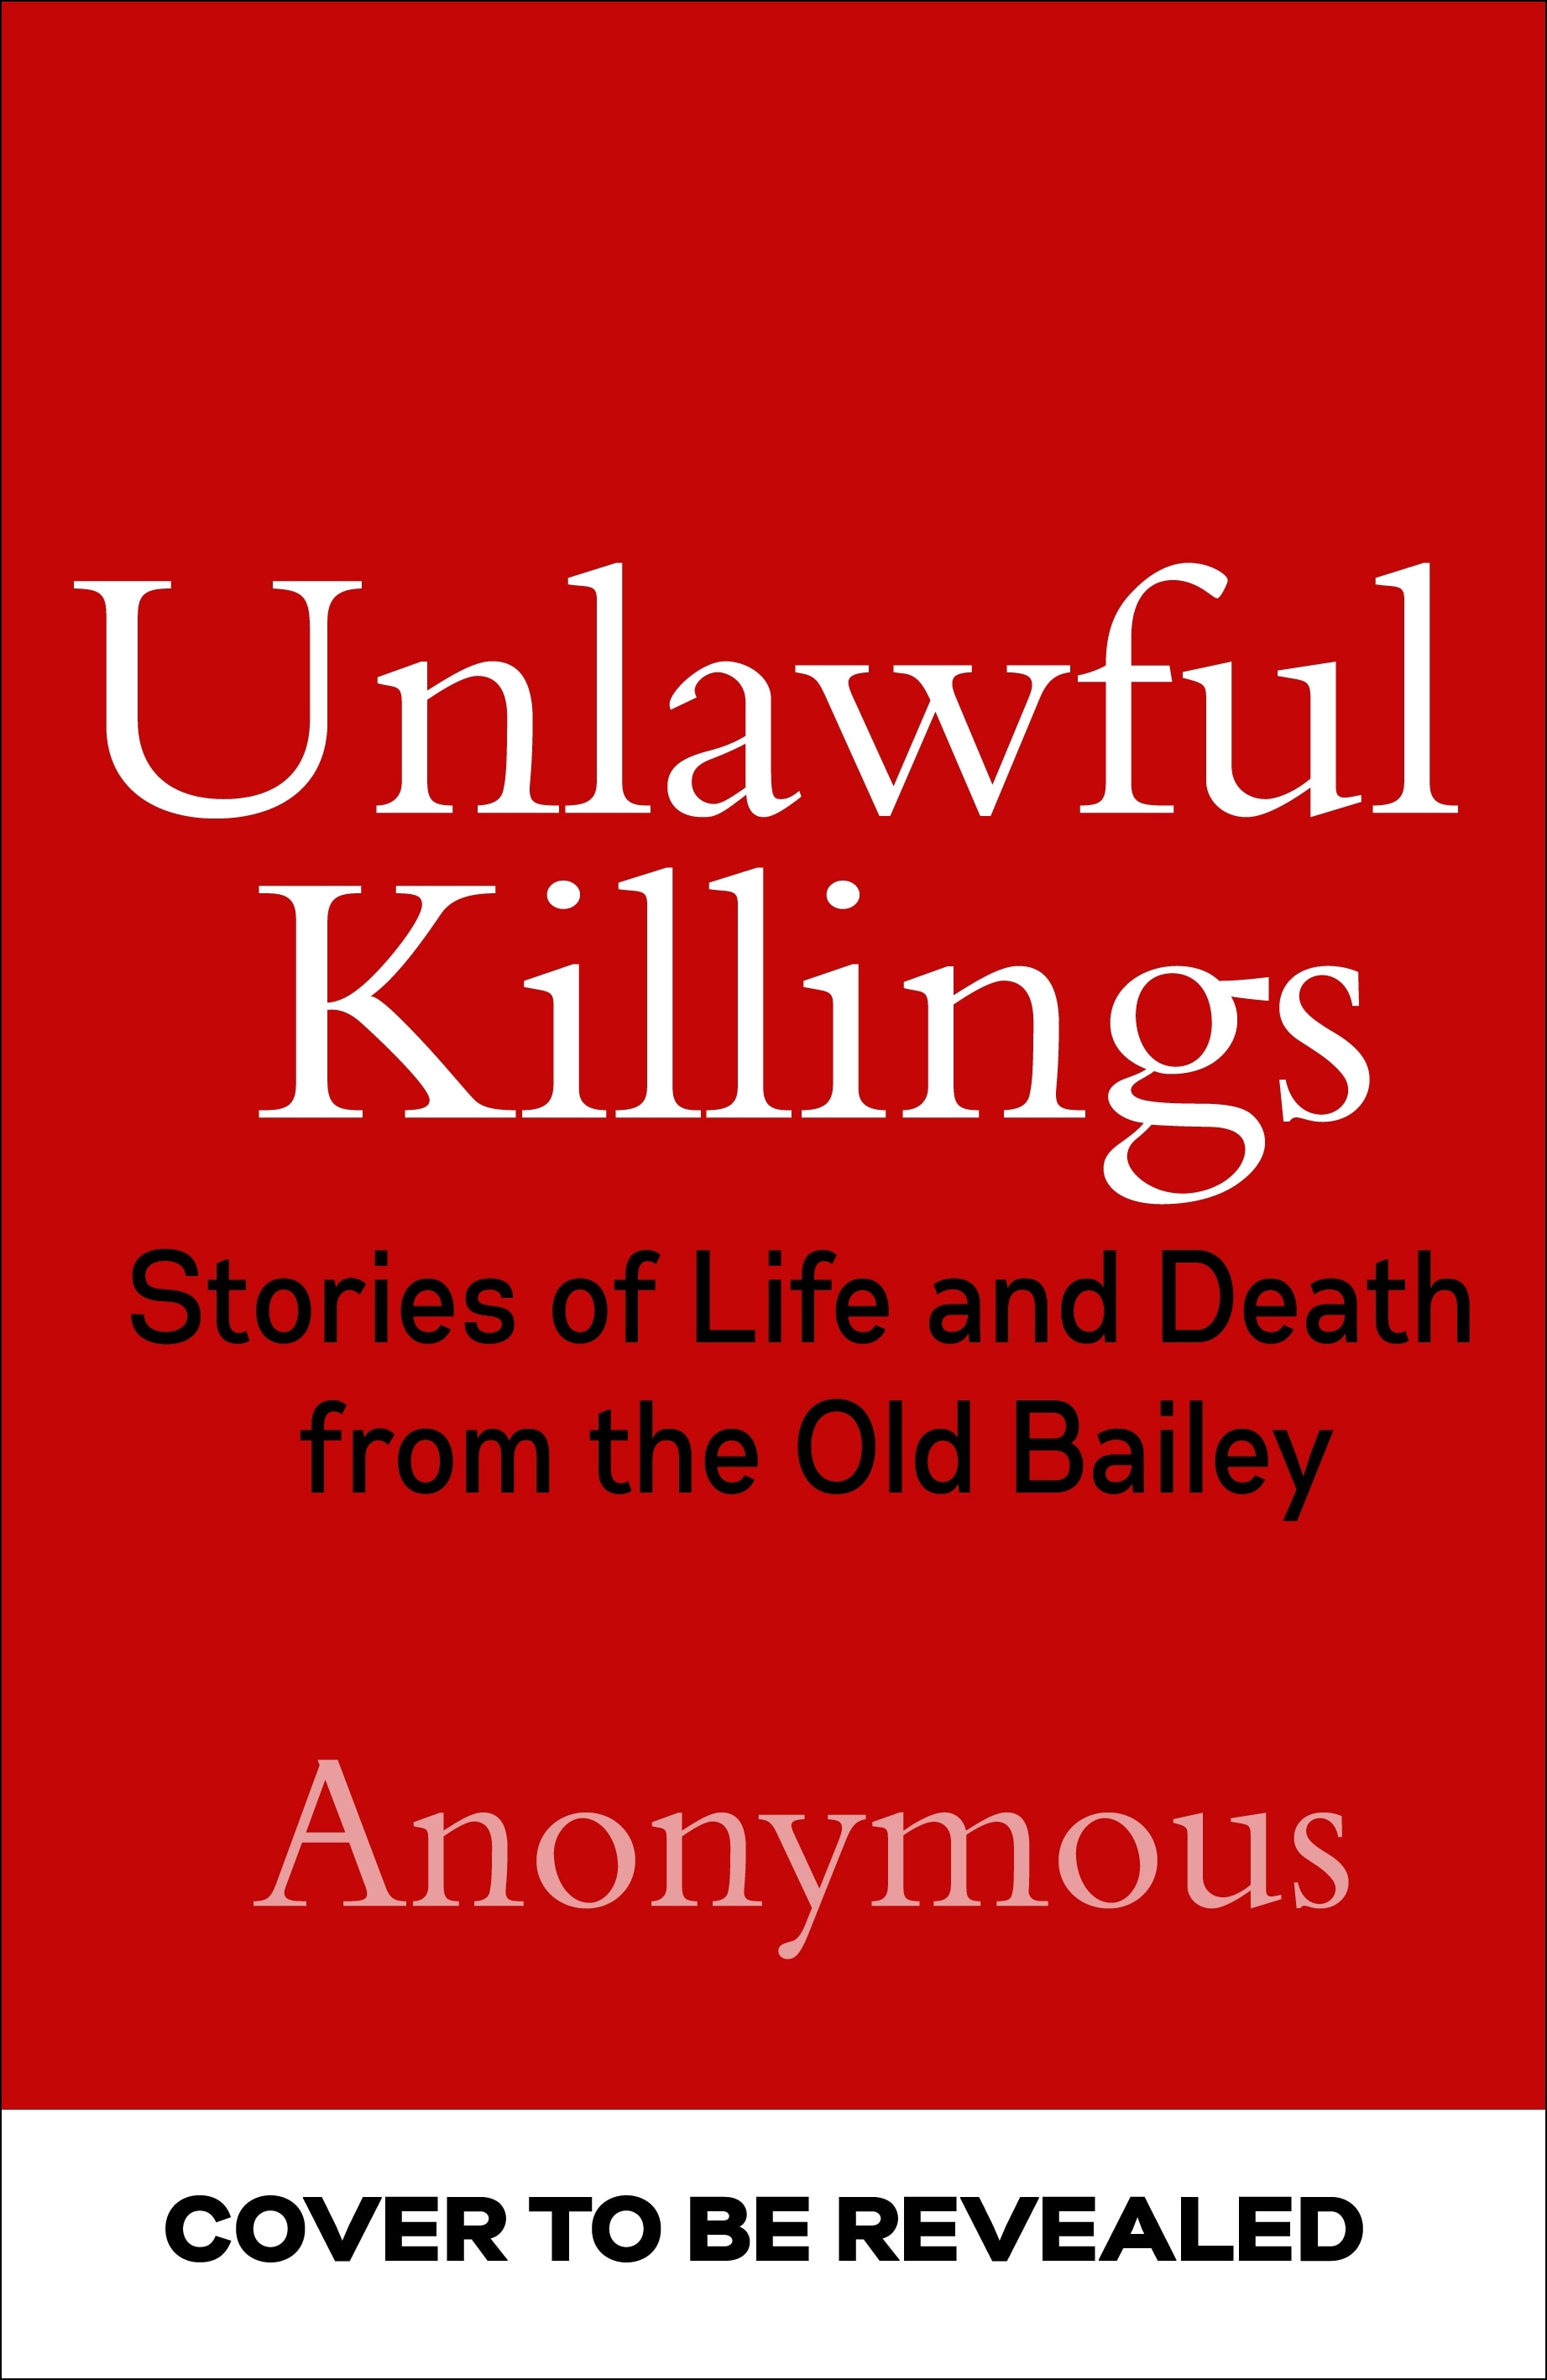 Book “Unlawful Killings” by Anonymous — June 9, 2022